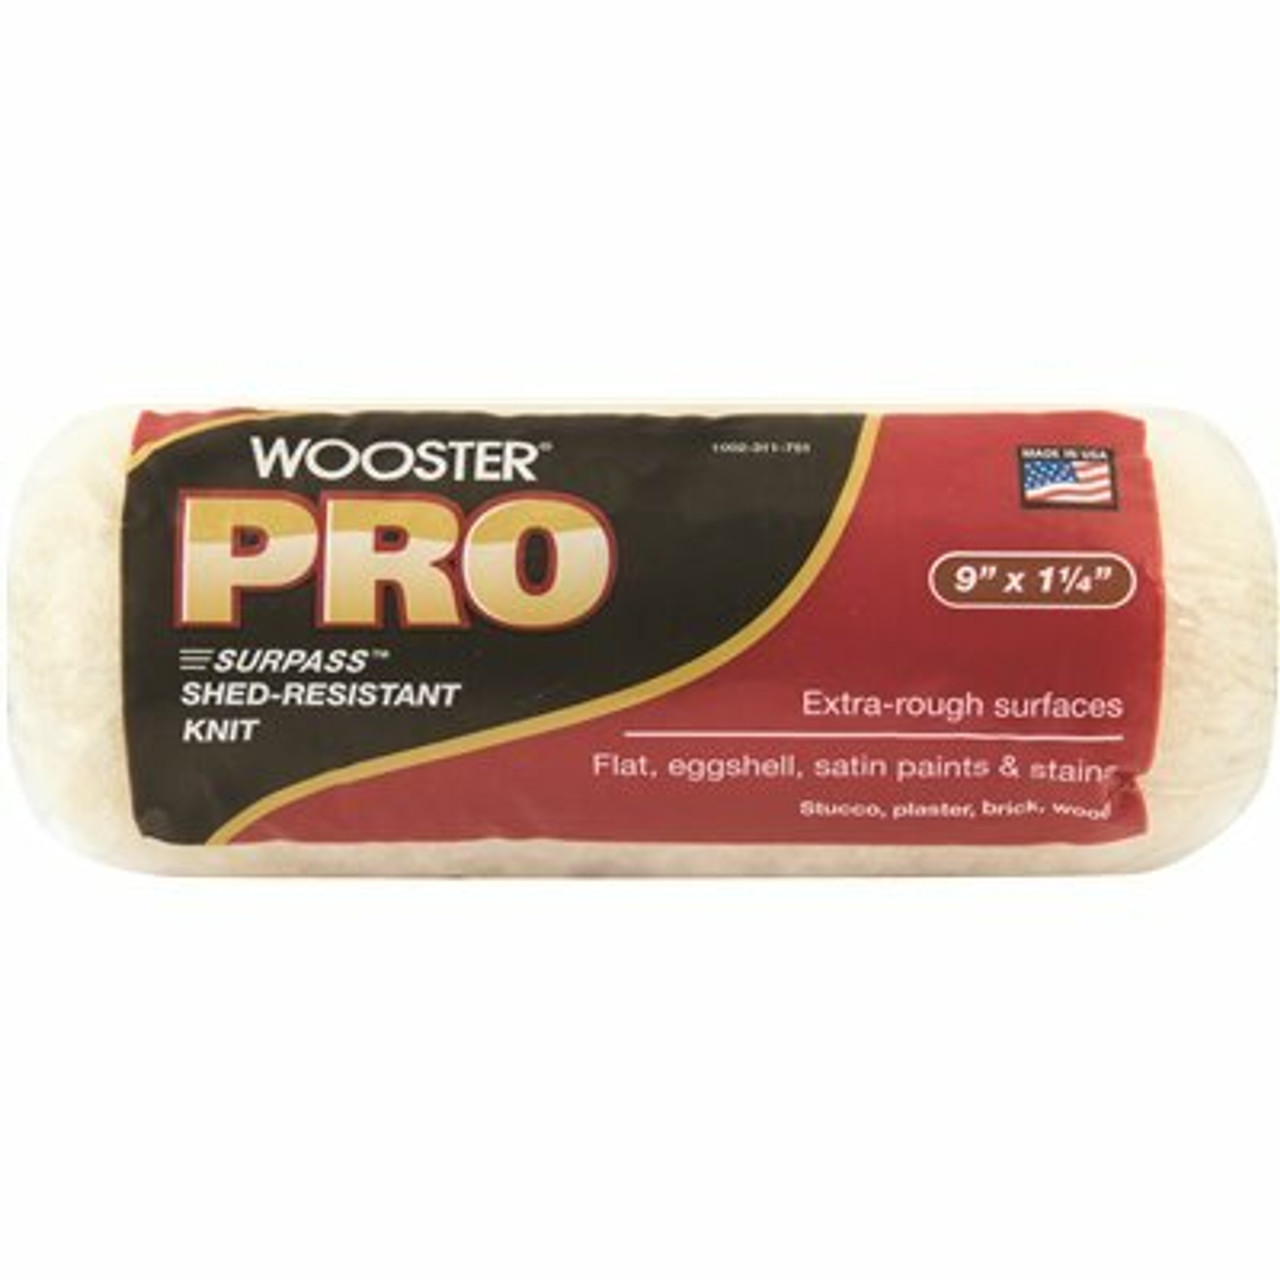 Wooster 9 In. X 1-1/4 In. Pro Surpass Shed-Resistant Knit High-Density Fabric Roller Cover